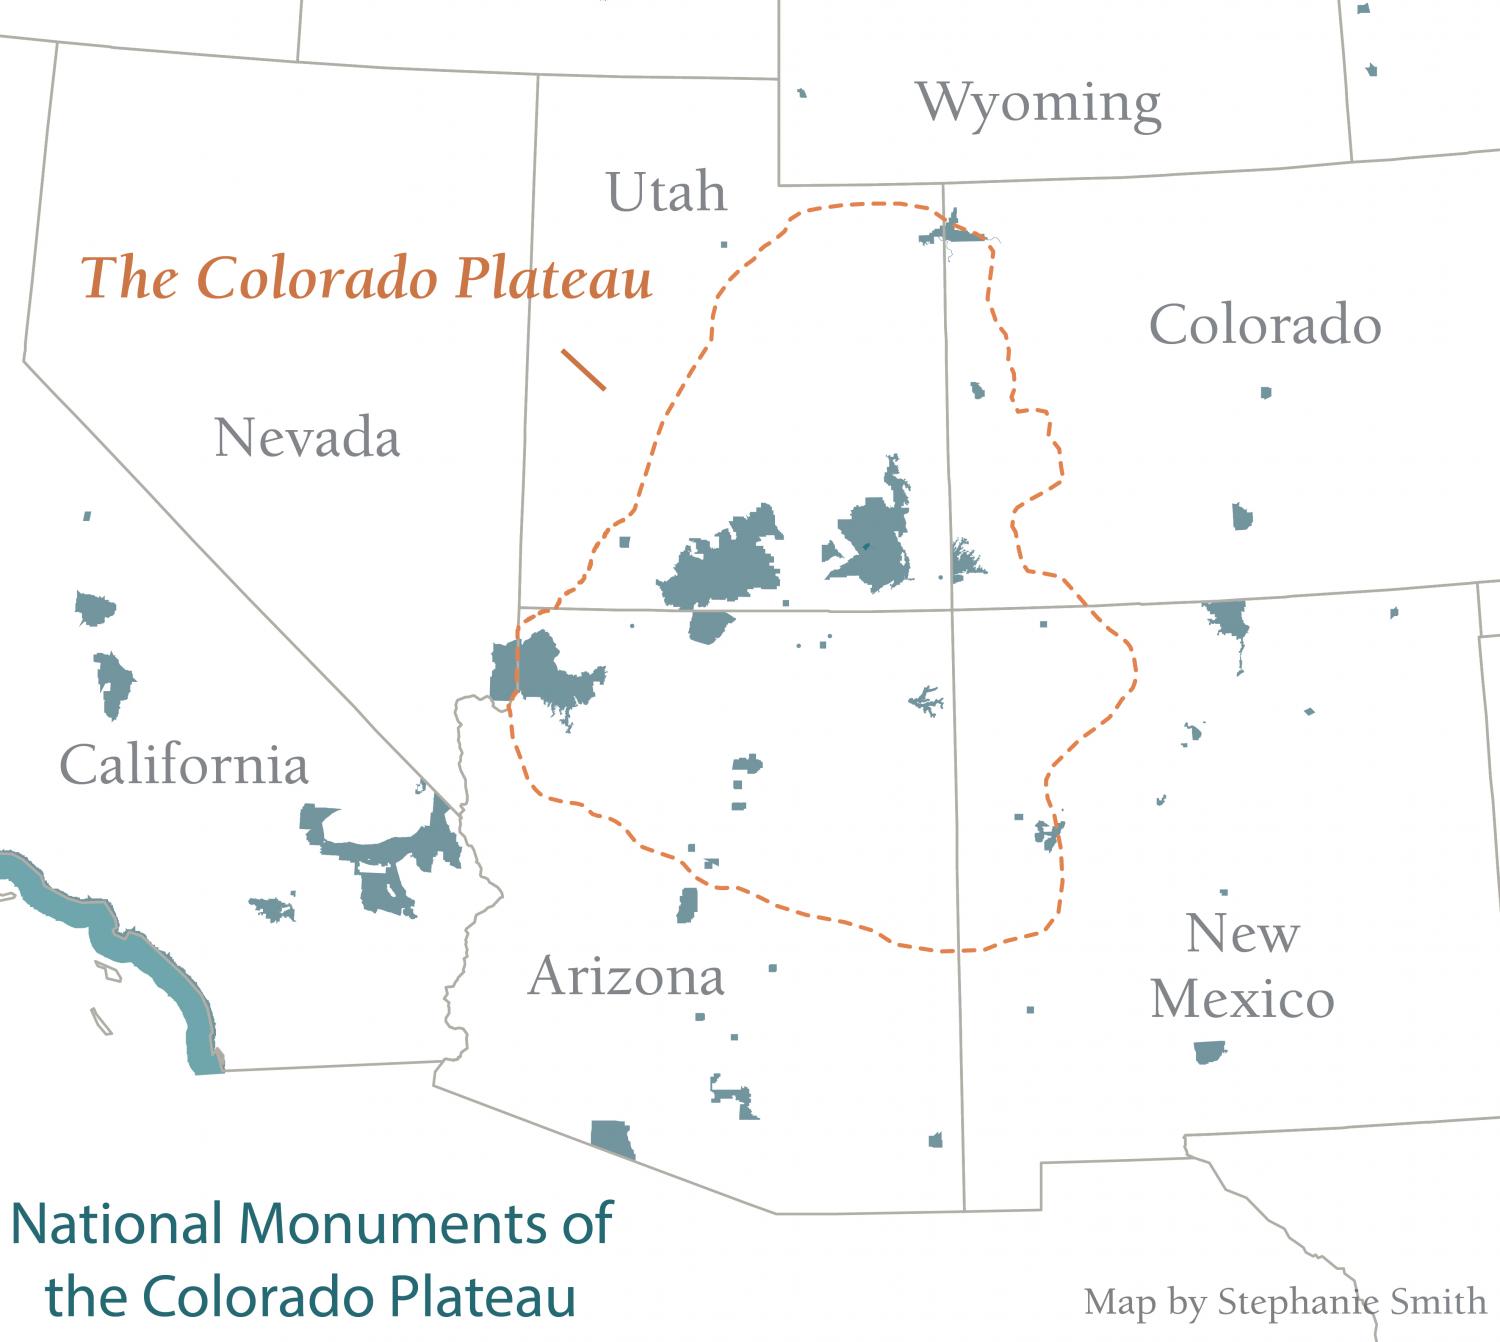 Map of National Monuments on the Colorado Plateau